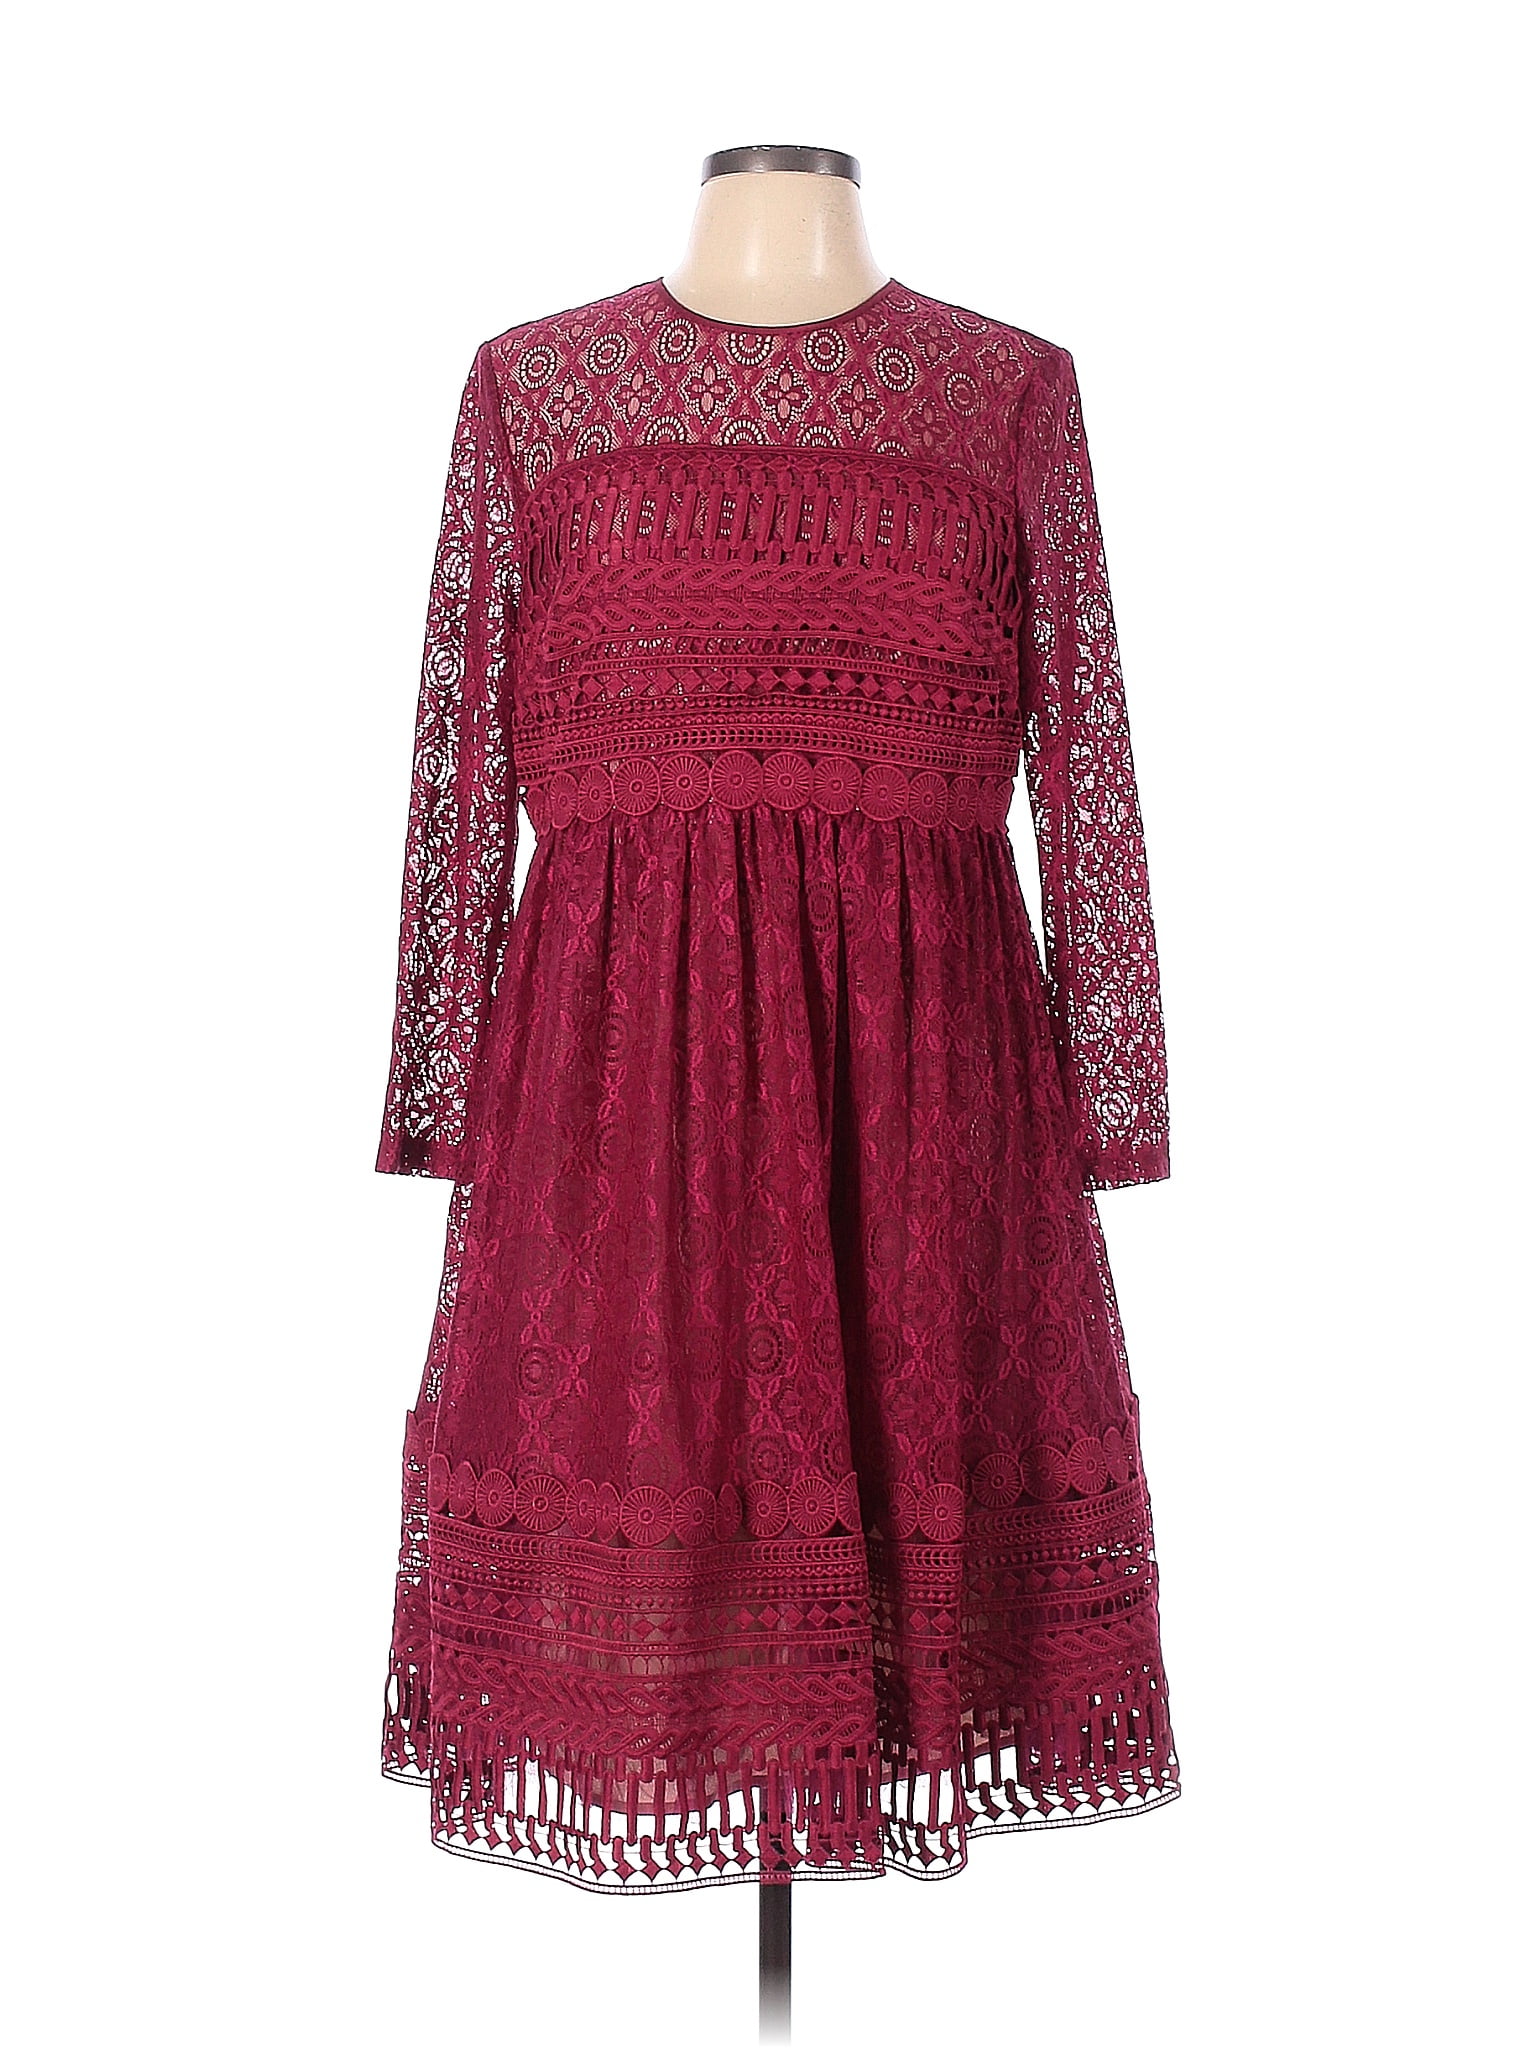 ASOS Solid Maroon Burgundy Casual Dress Size 10 - 73% off